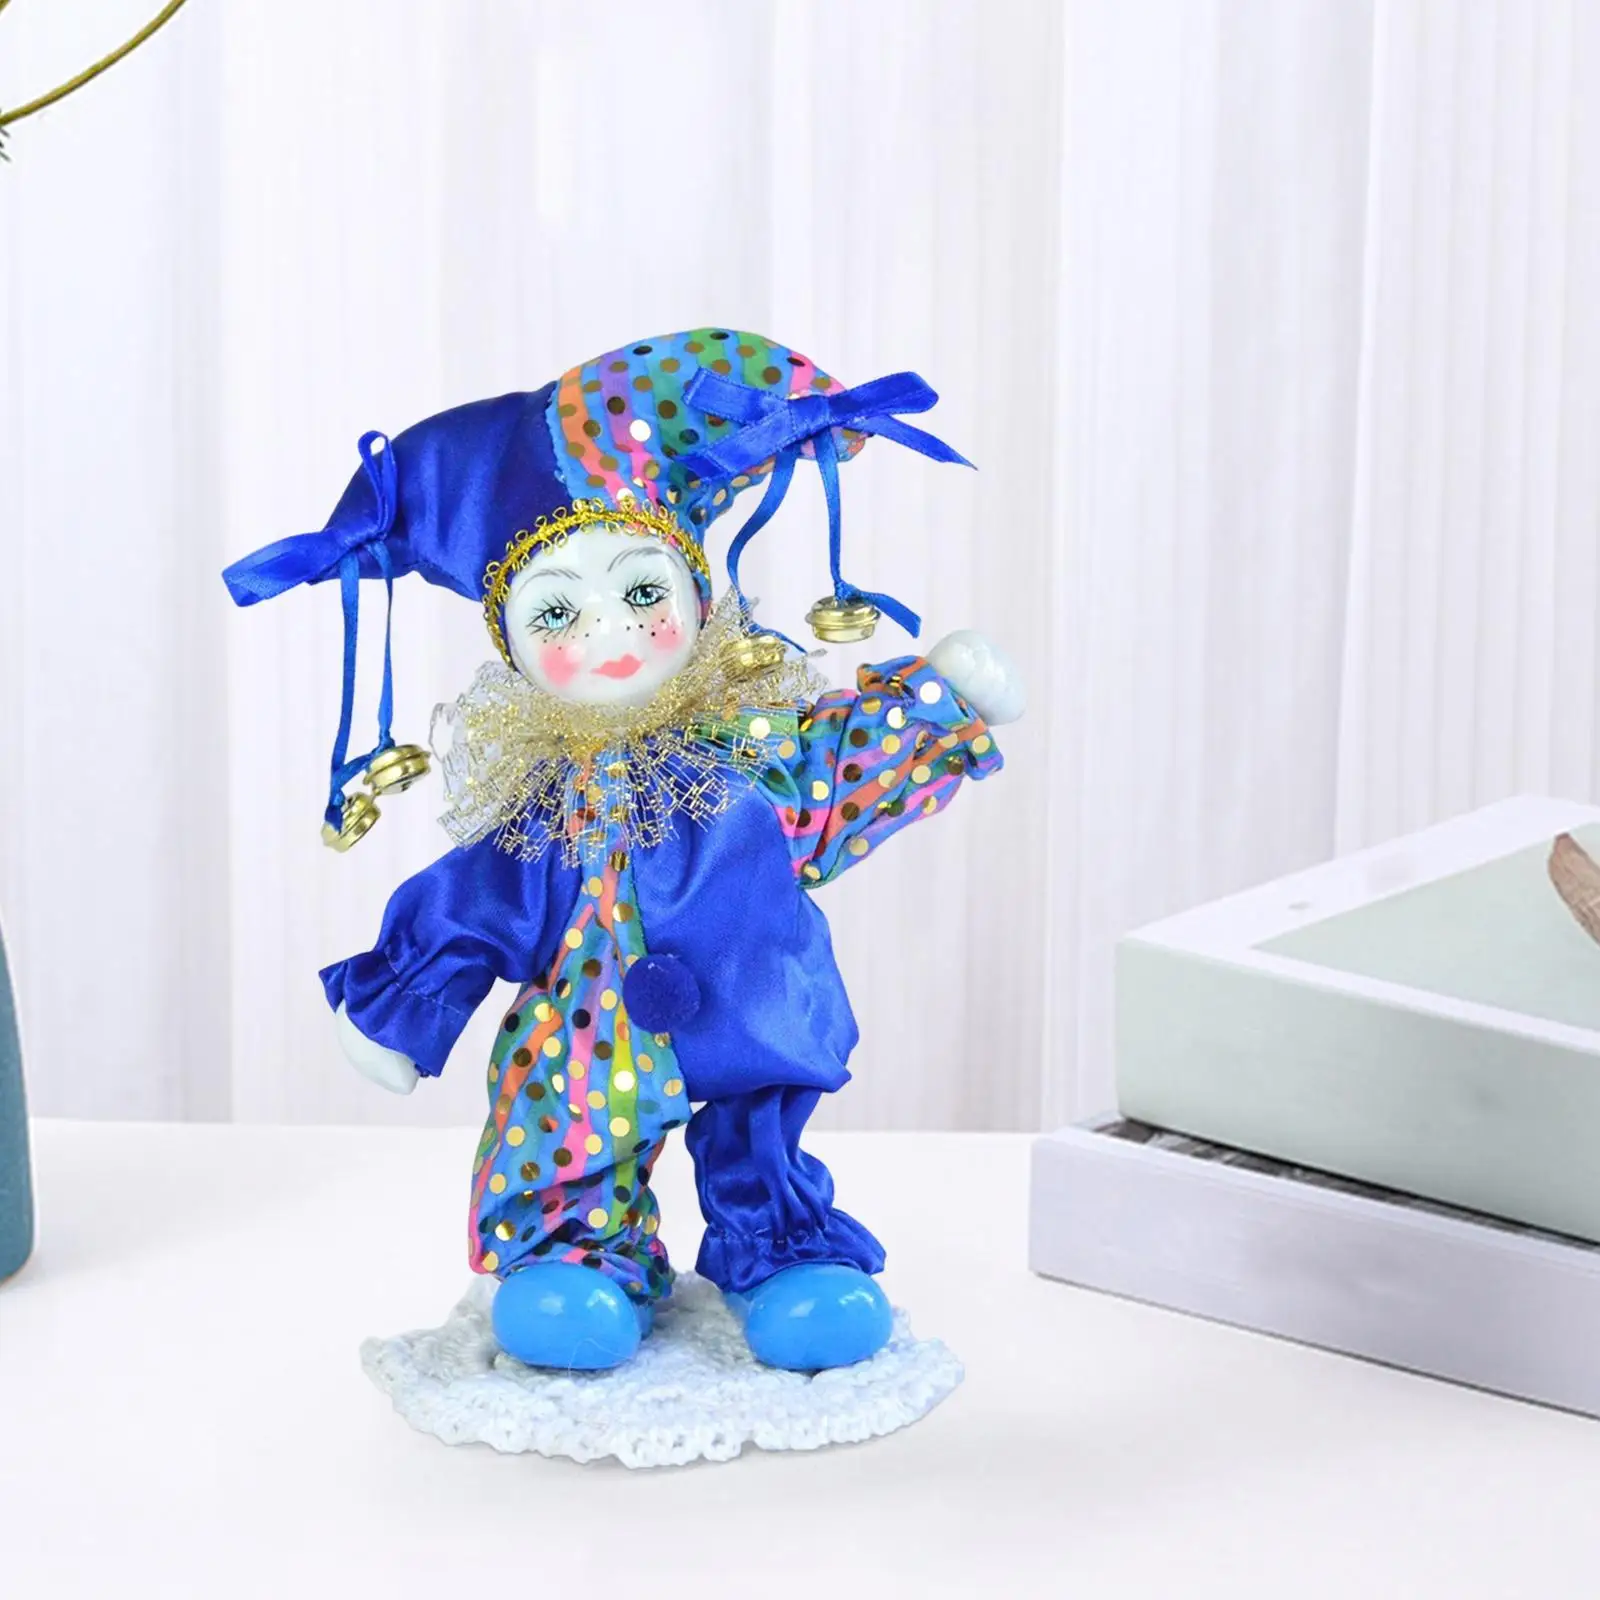 Clown Doll Desk Ornaments Home Decoration for Valentin Gift Collections